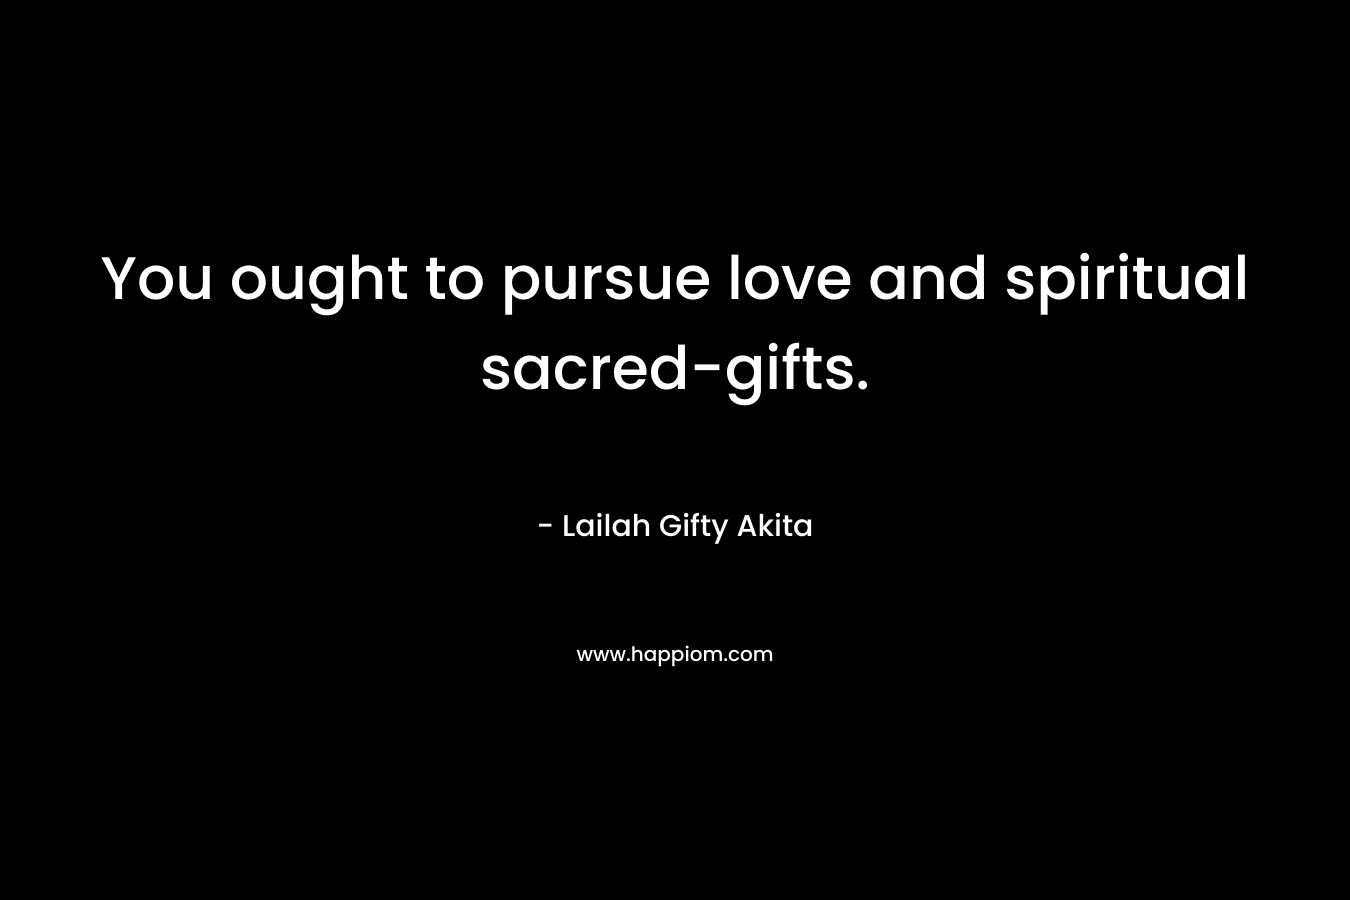 You ought to pursue love and spiritual sacred-gifts.